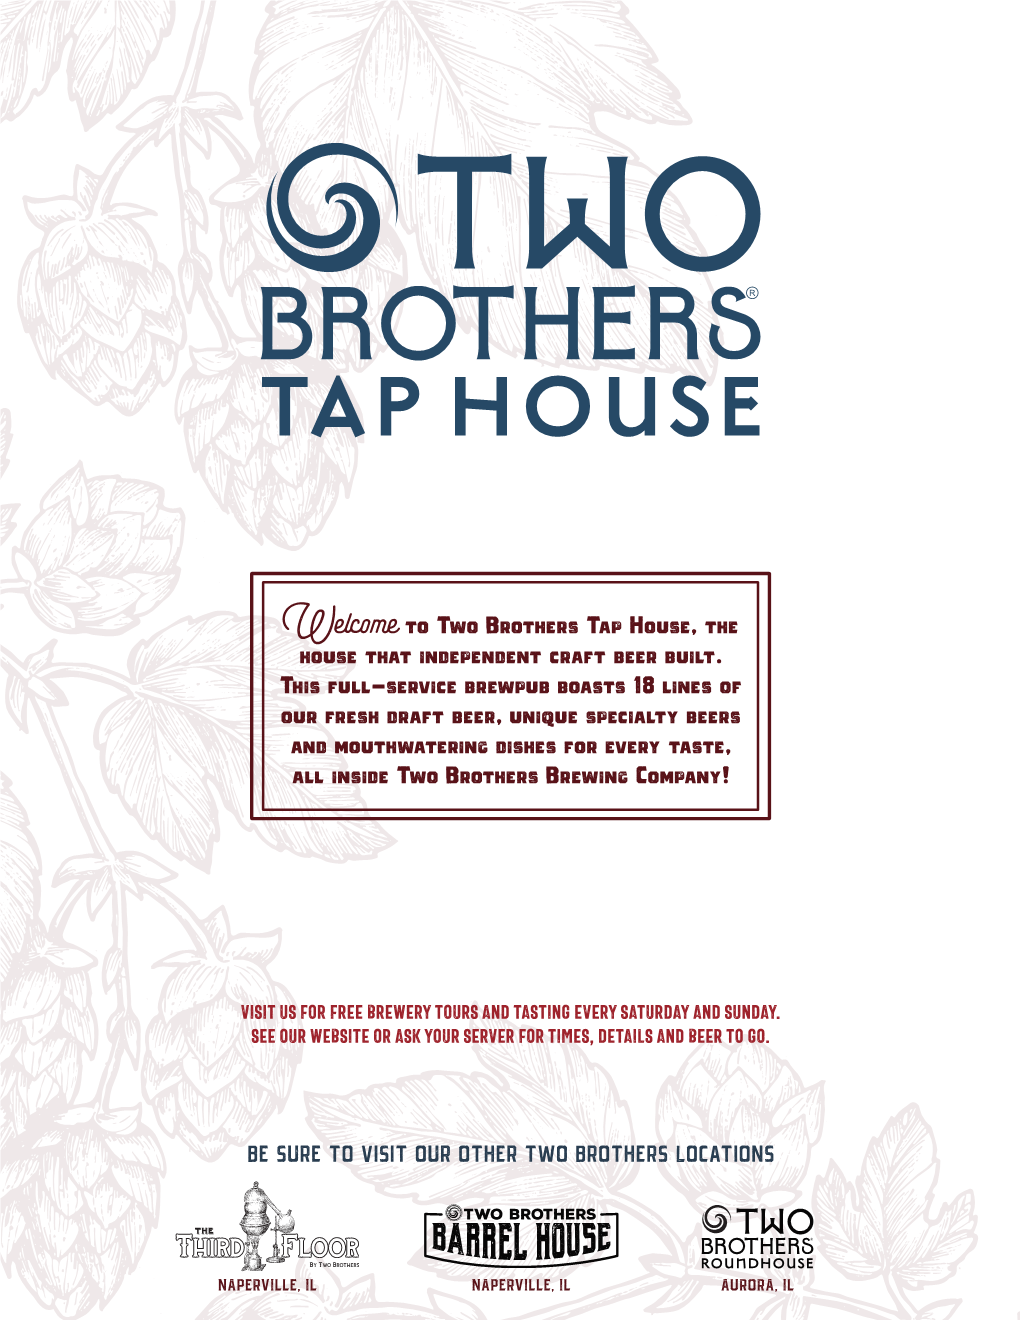 Welcometo Two Brothers Tap House, the House That Independent Craft